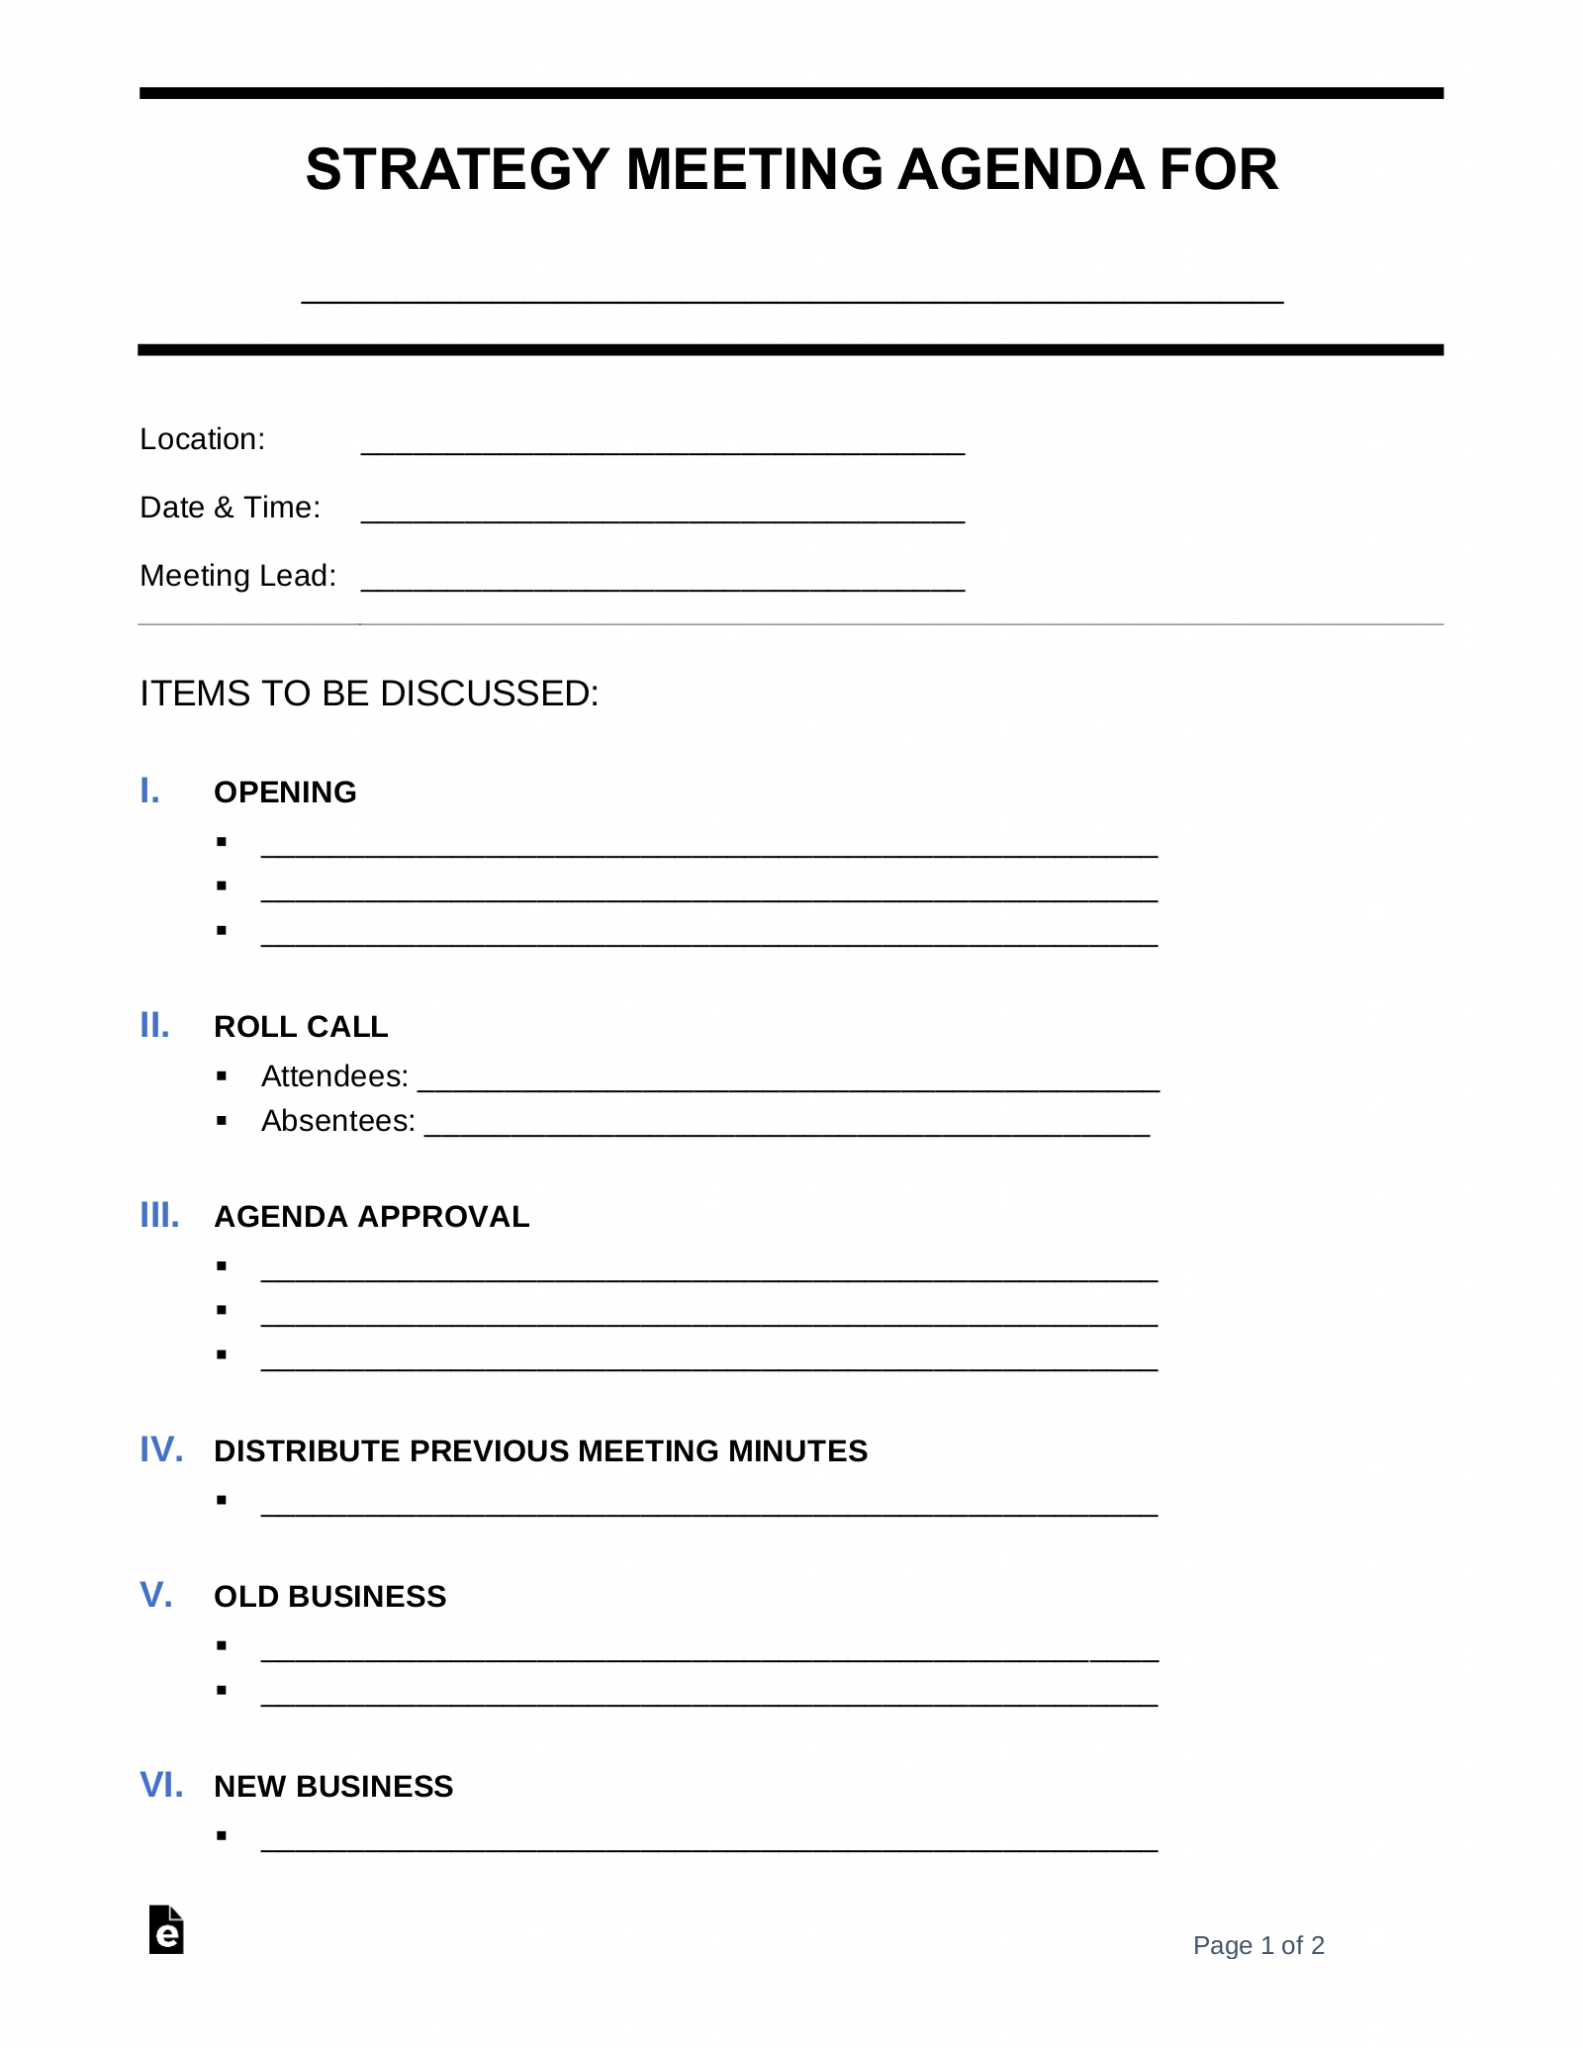 free-strategy-meeting-agenda-template-sample-pdf-word-eforms